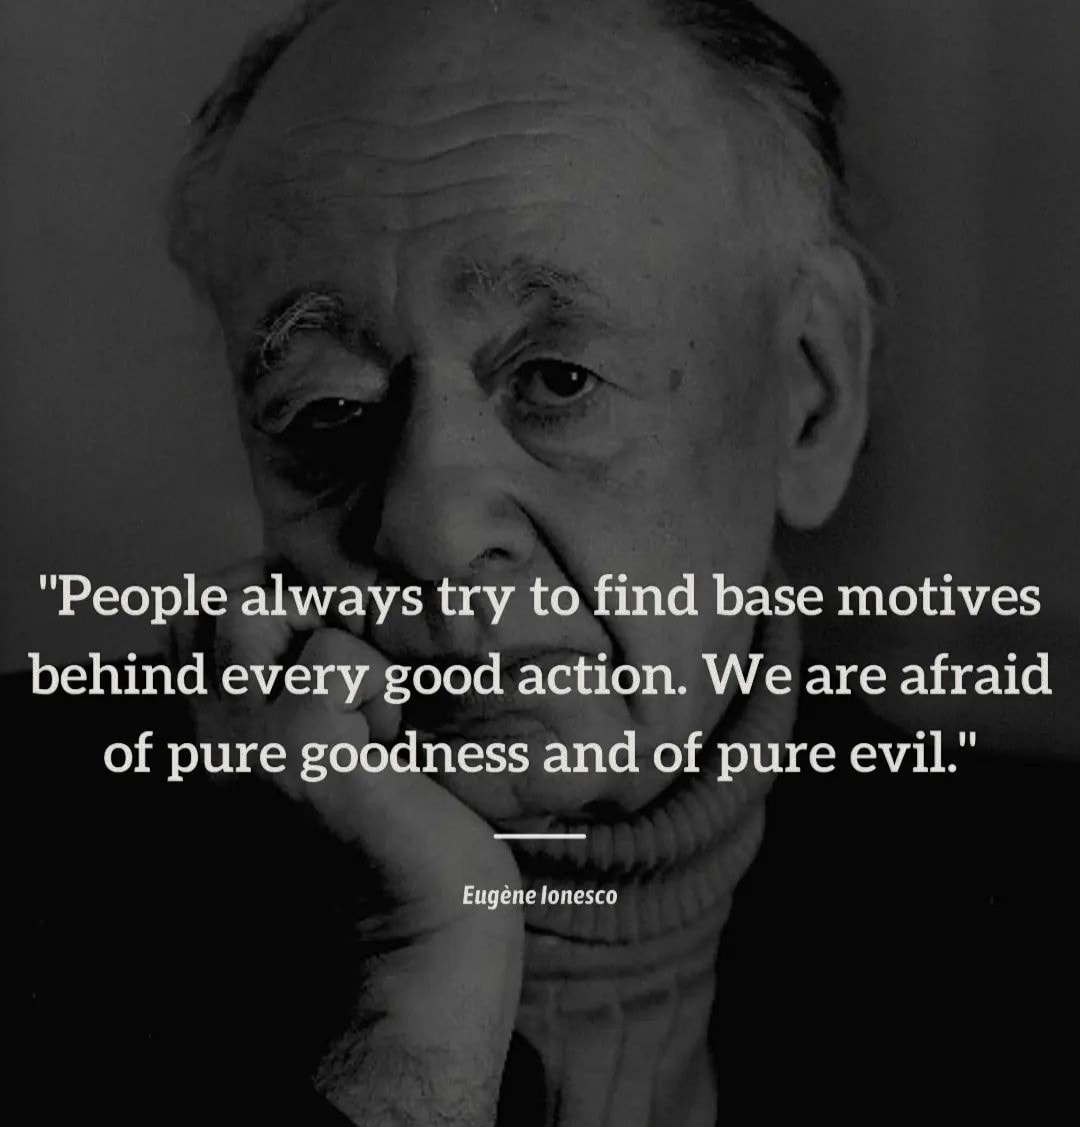 People always try to find base motives behind every good action. We are afraid of pure goodness and of pure evil. -Eugène Ionesco